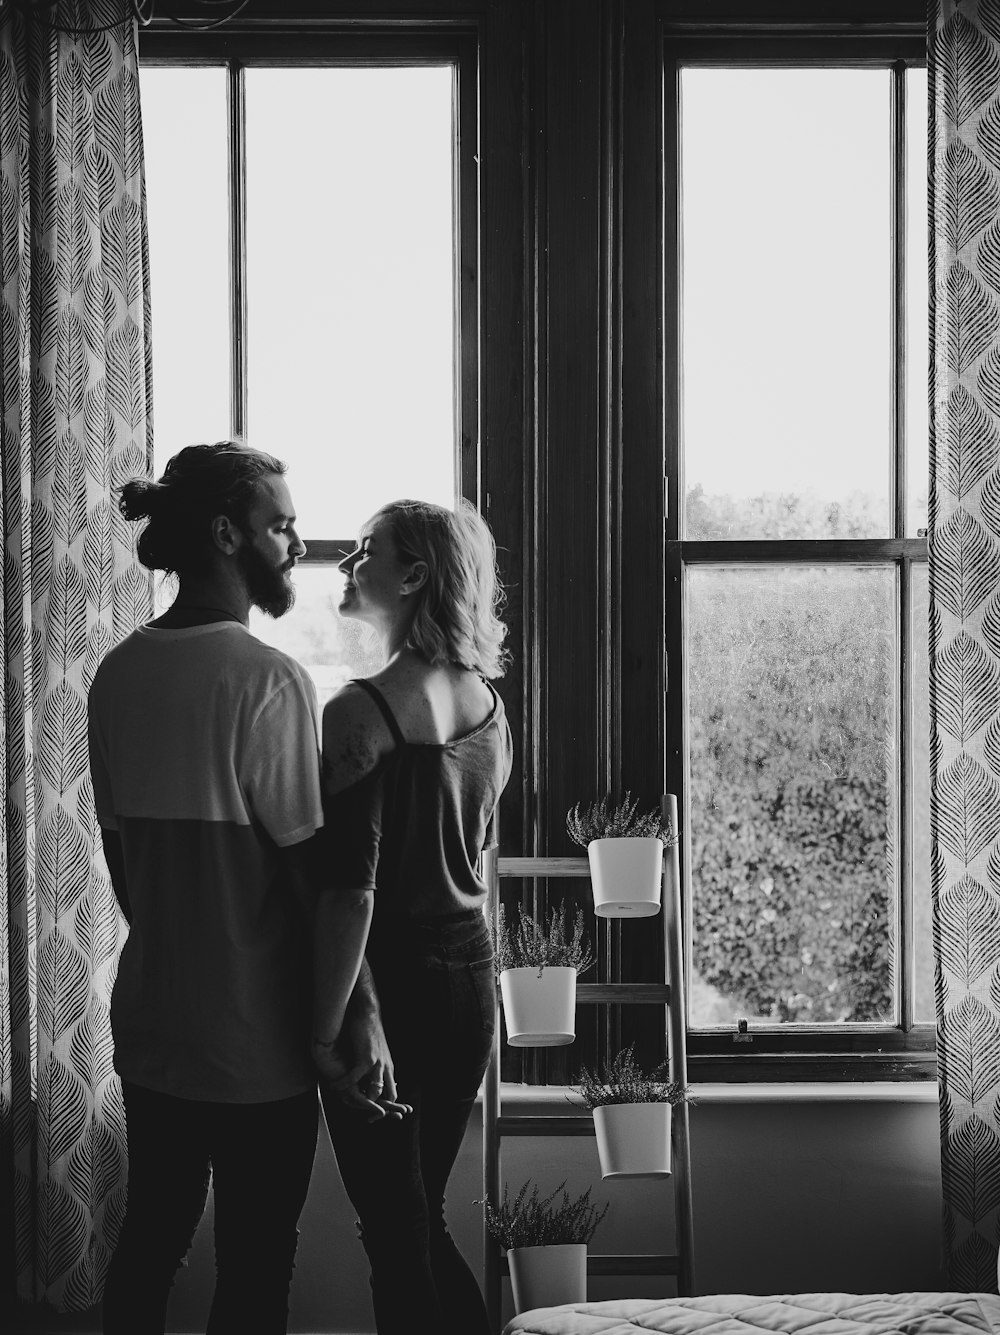 man and woman facing each other near window